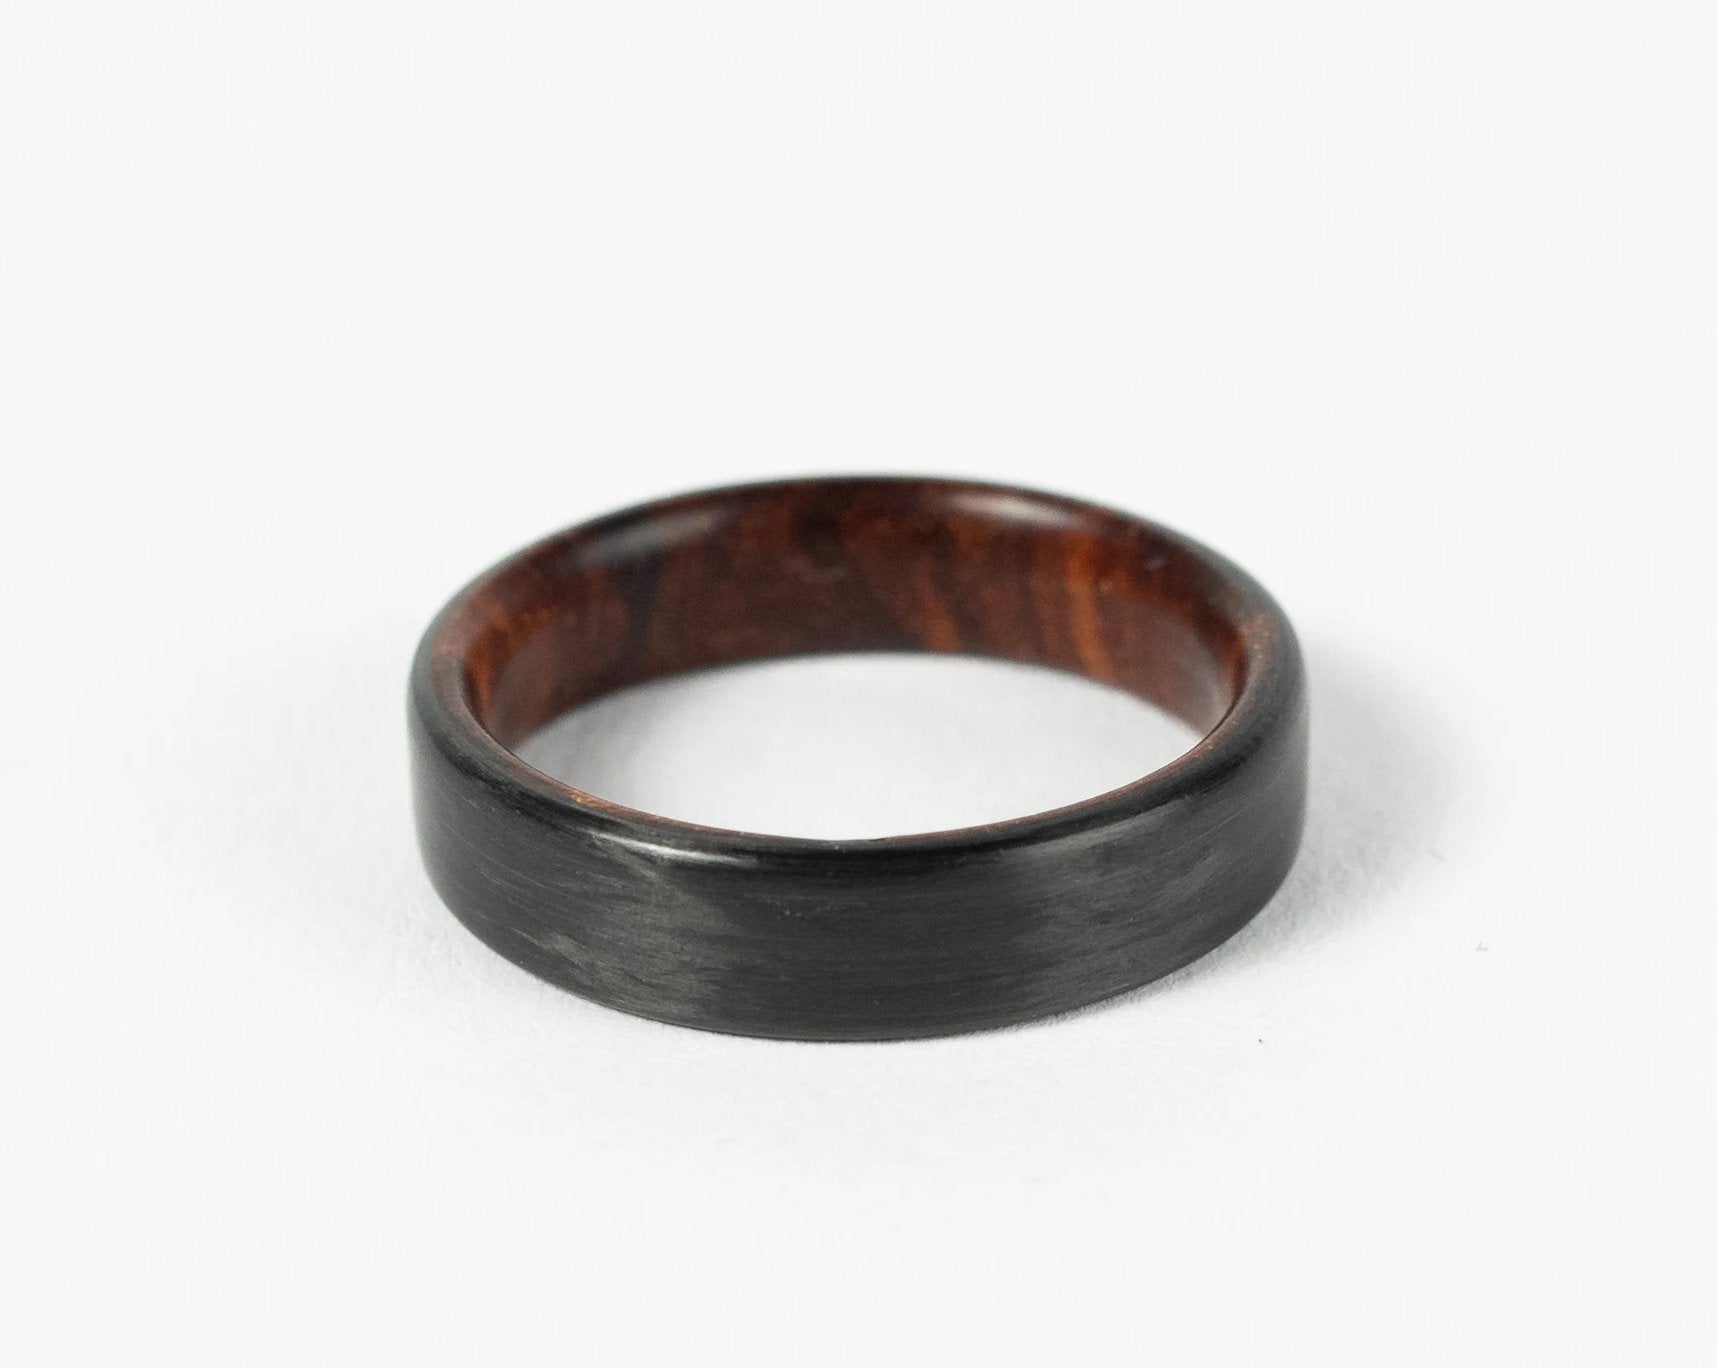 Carbon Fiber and Wood Ring